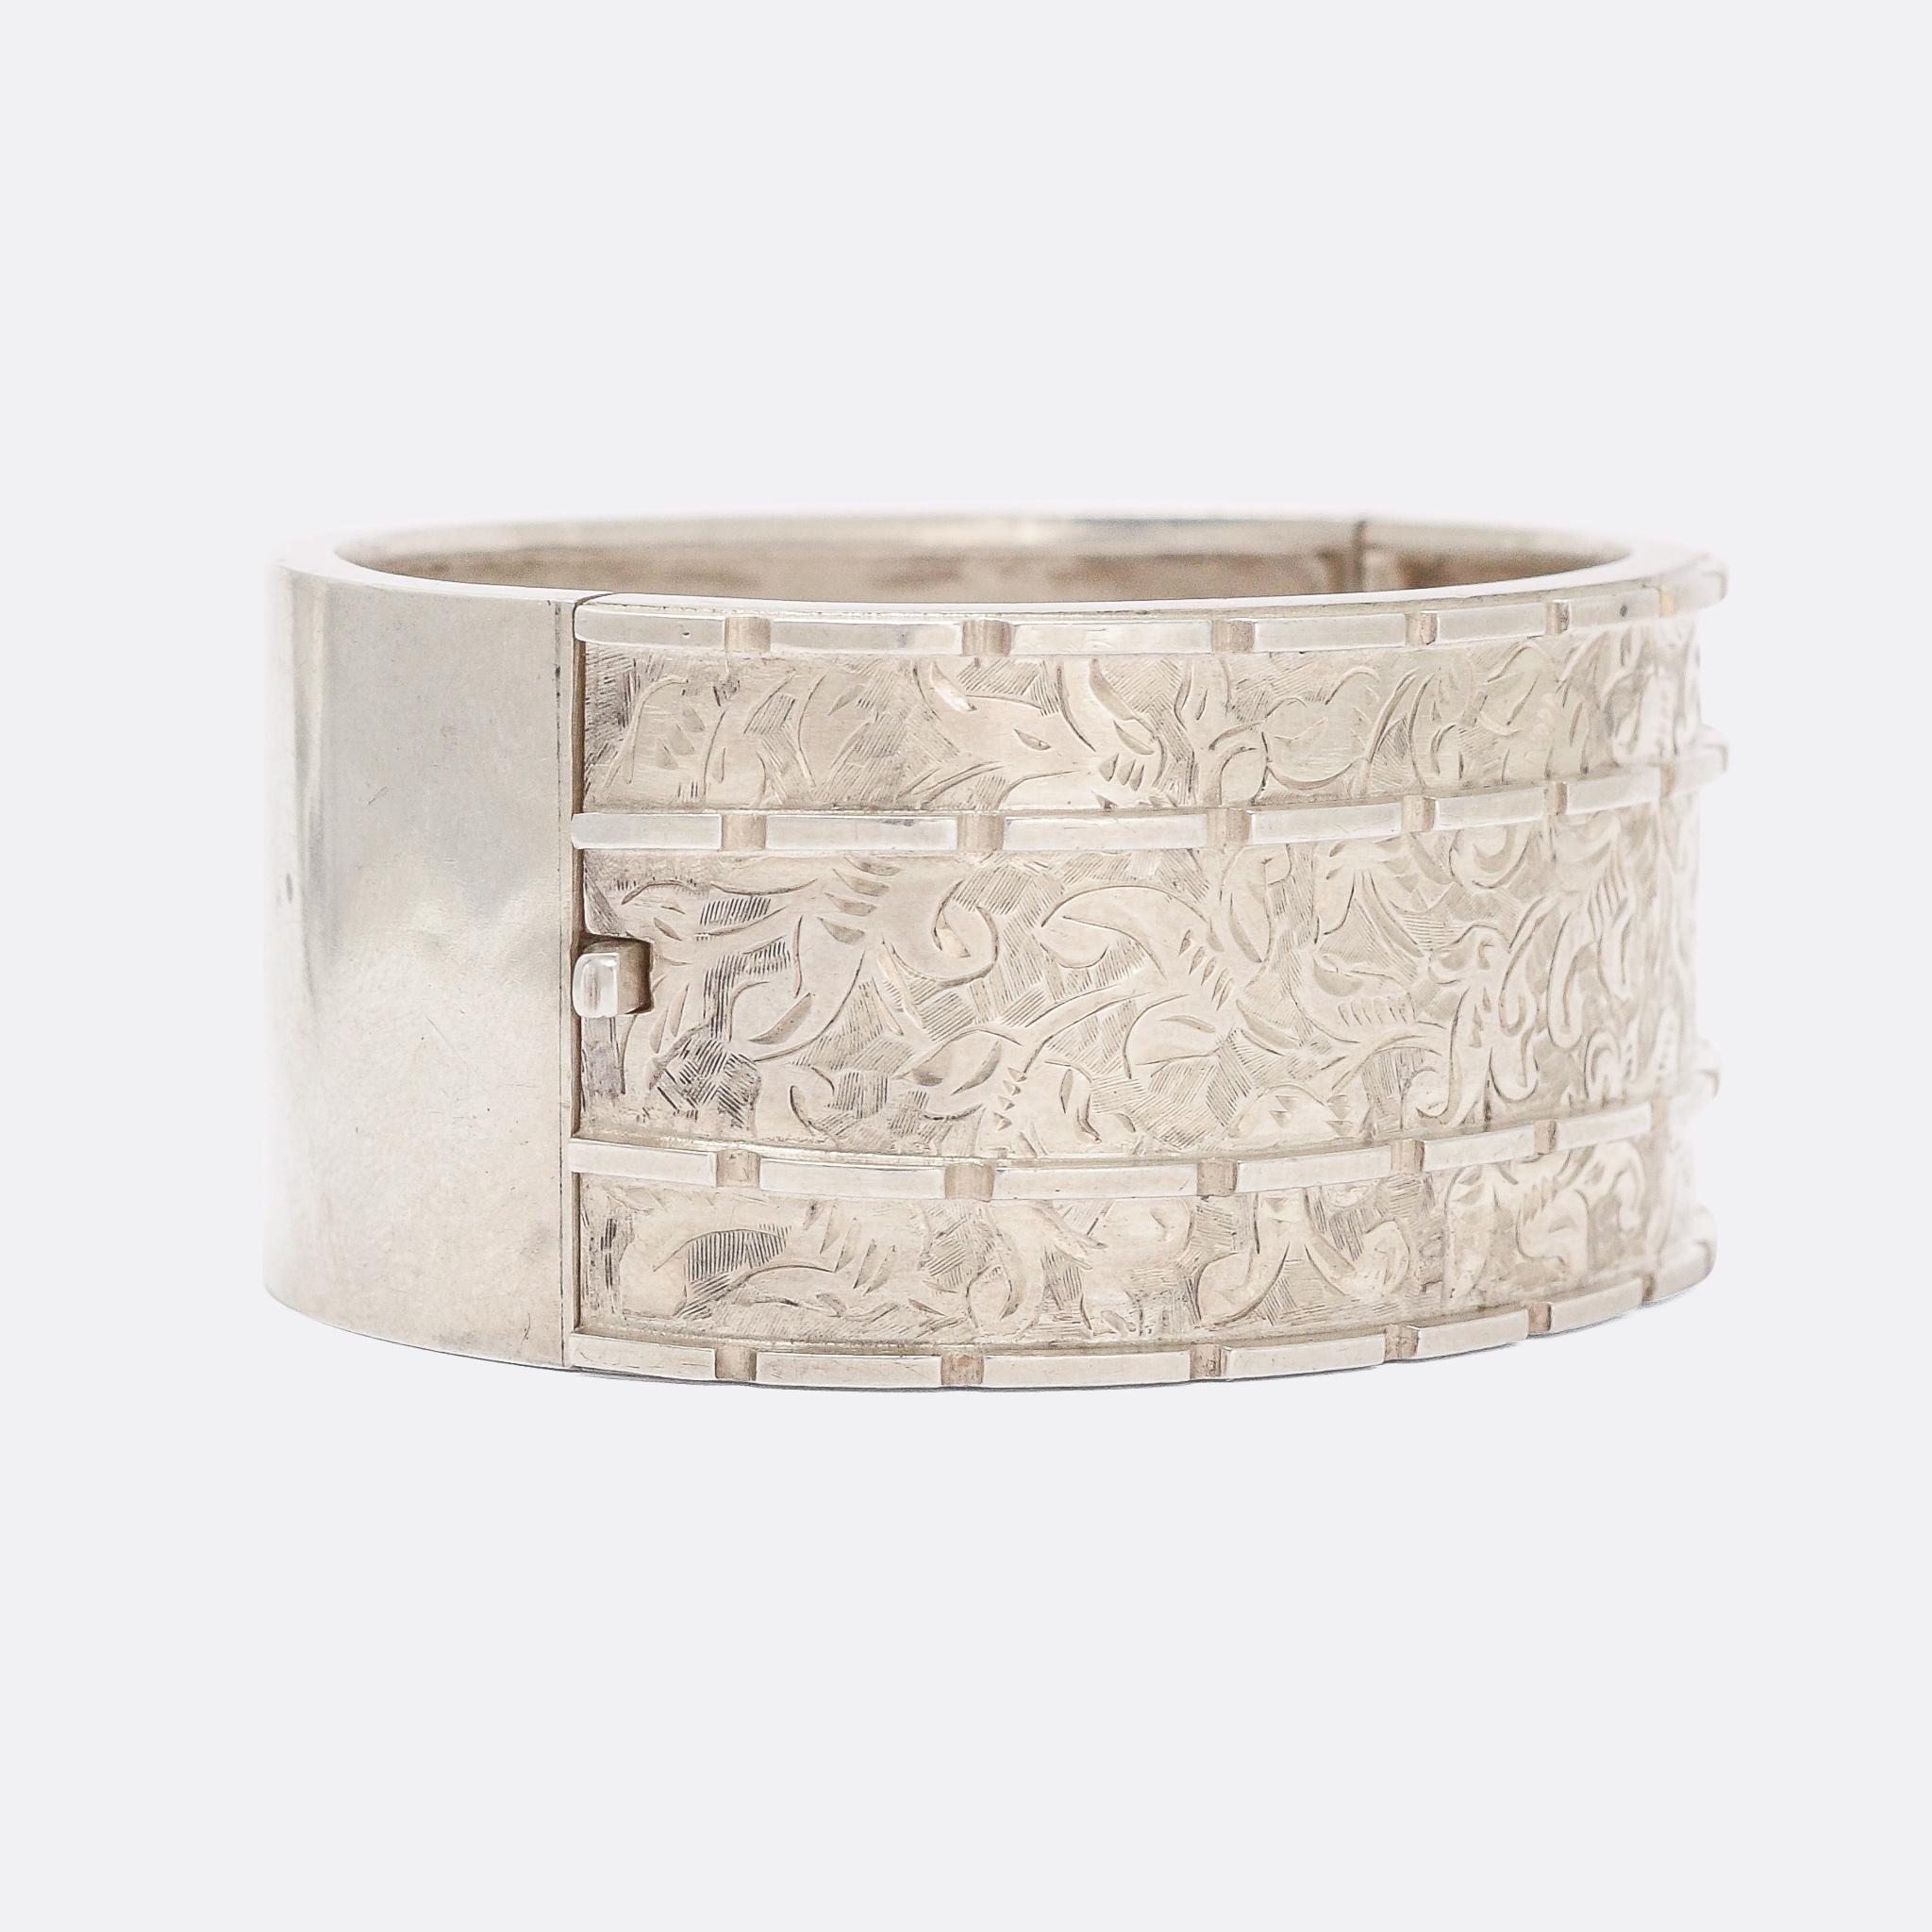 A superb Victorian cuff bangle modelled in sterling silver with a masterclass in hand-chased detailing. It's decorated with intricate foliate motifs, and modelled in Sterling Silver throughout - dating from the 1880s.

MEASUREMENTS
Width: